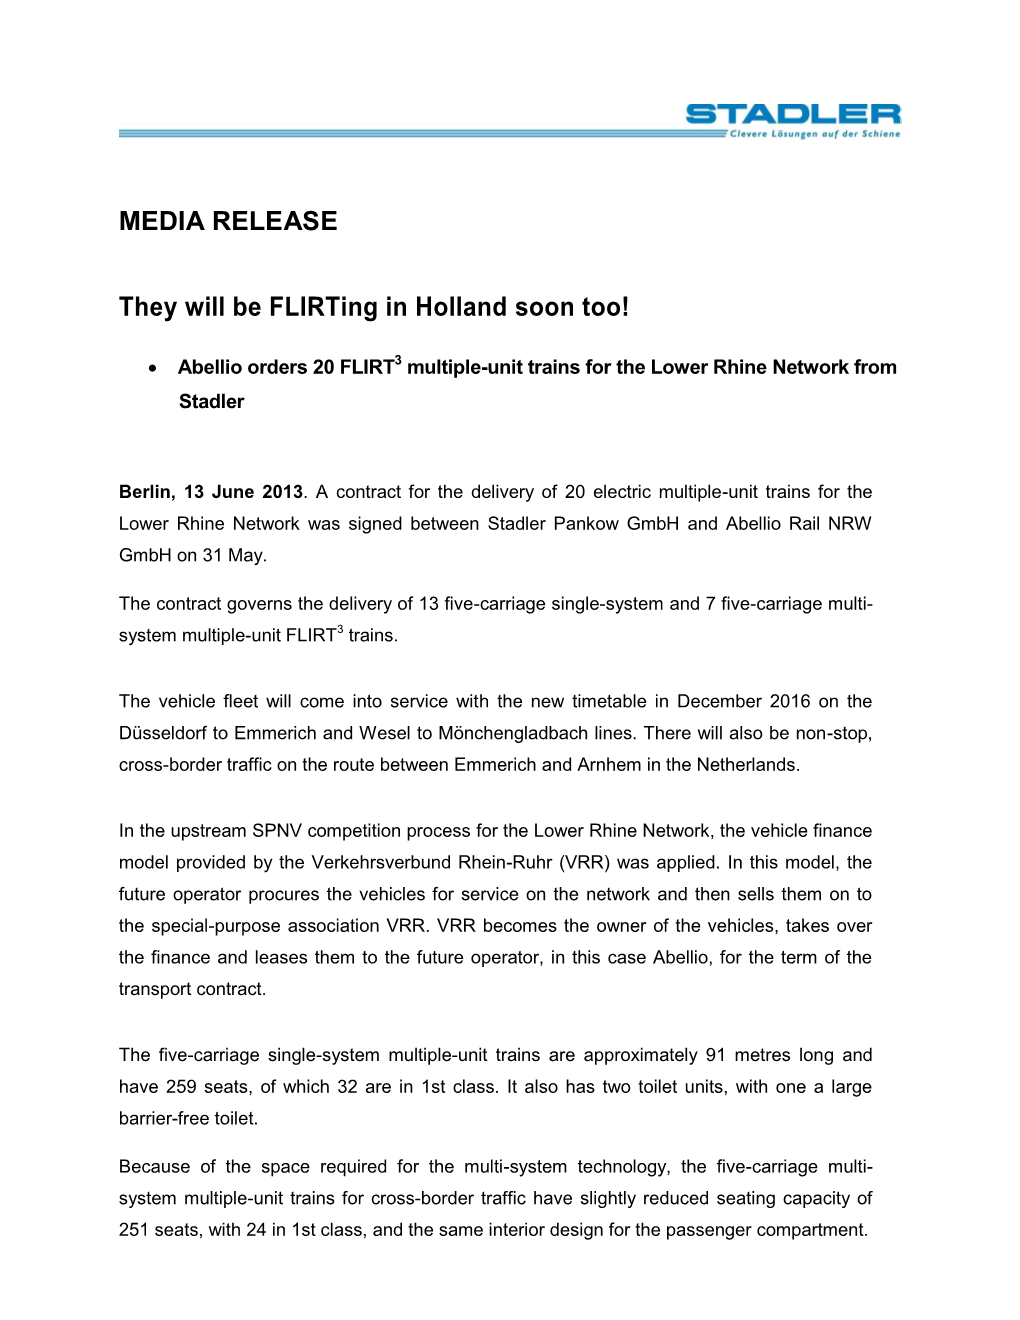 MEDIA RELEASE They Will Be Flirting in Holland Soon Too!